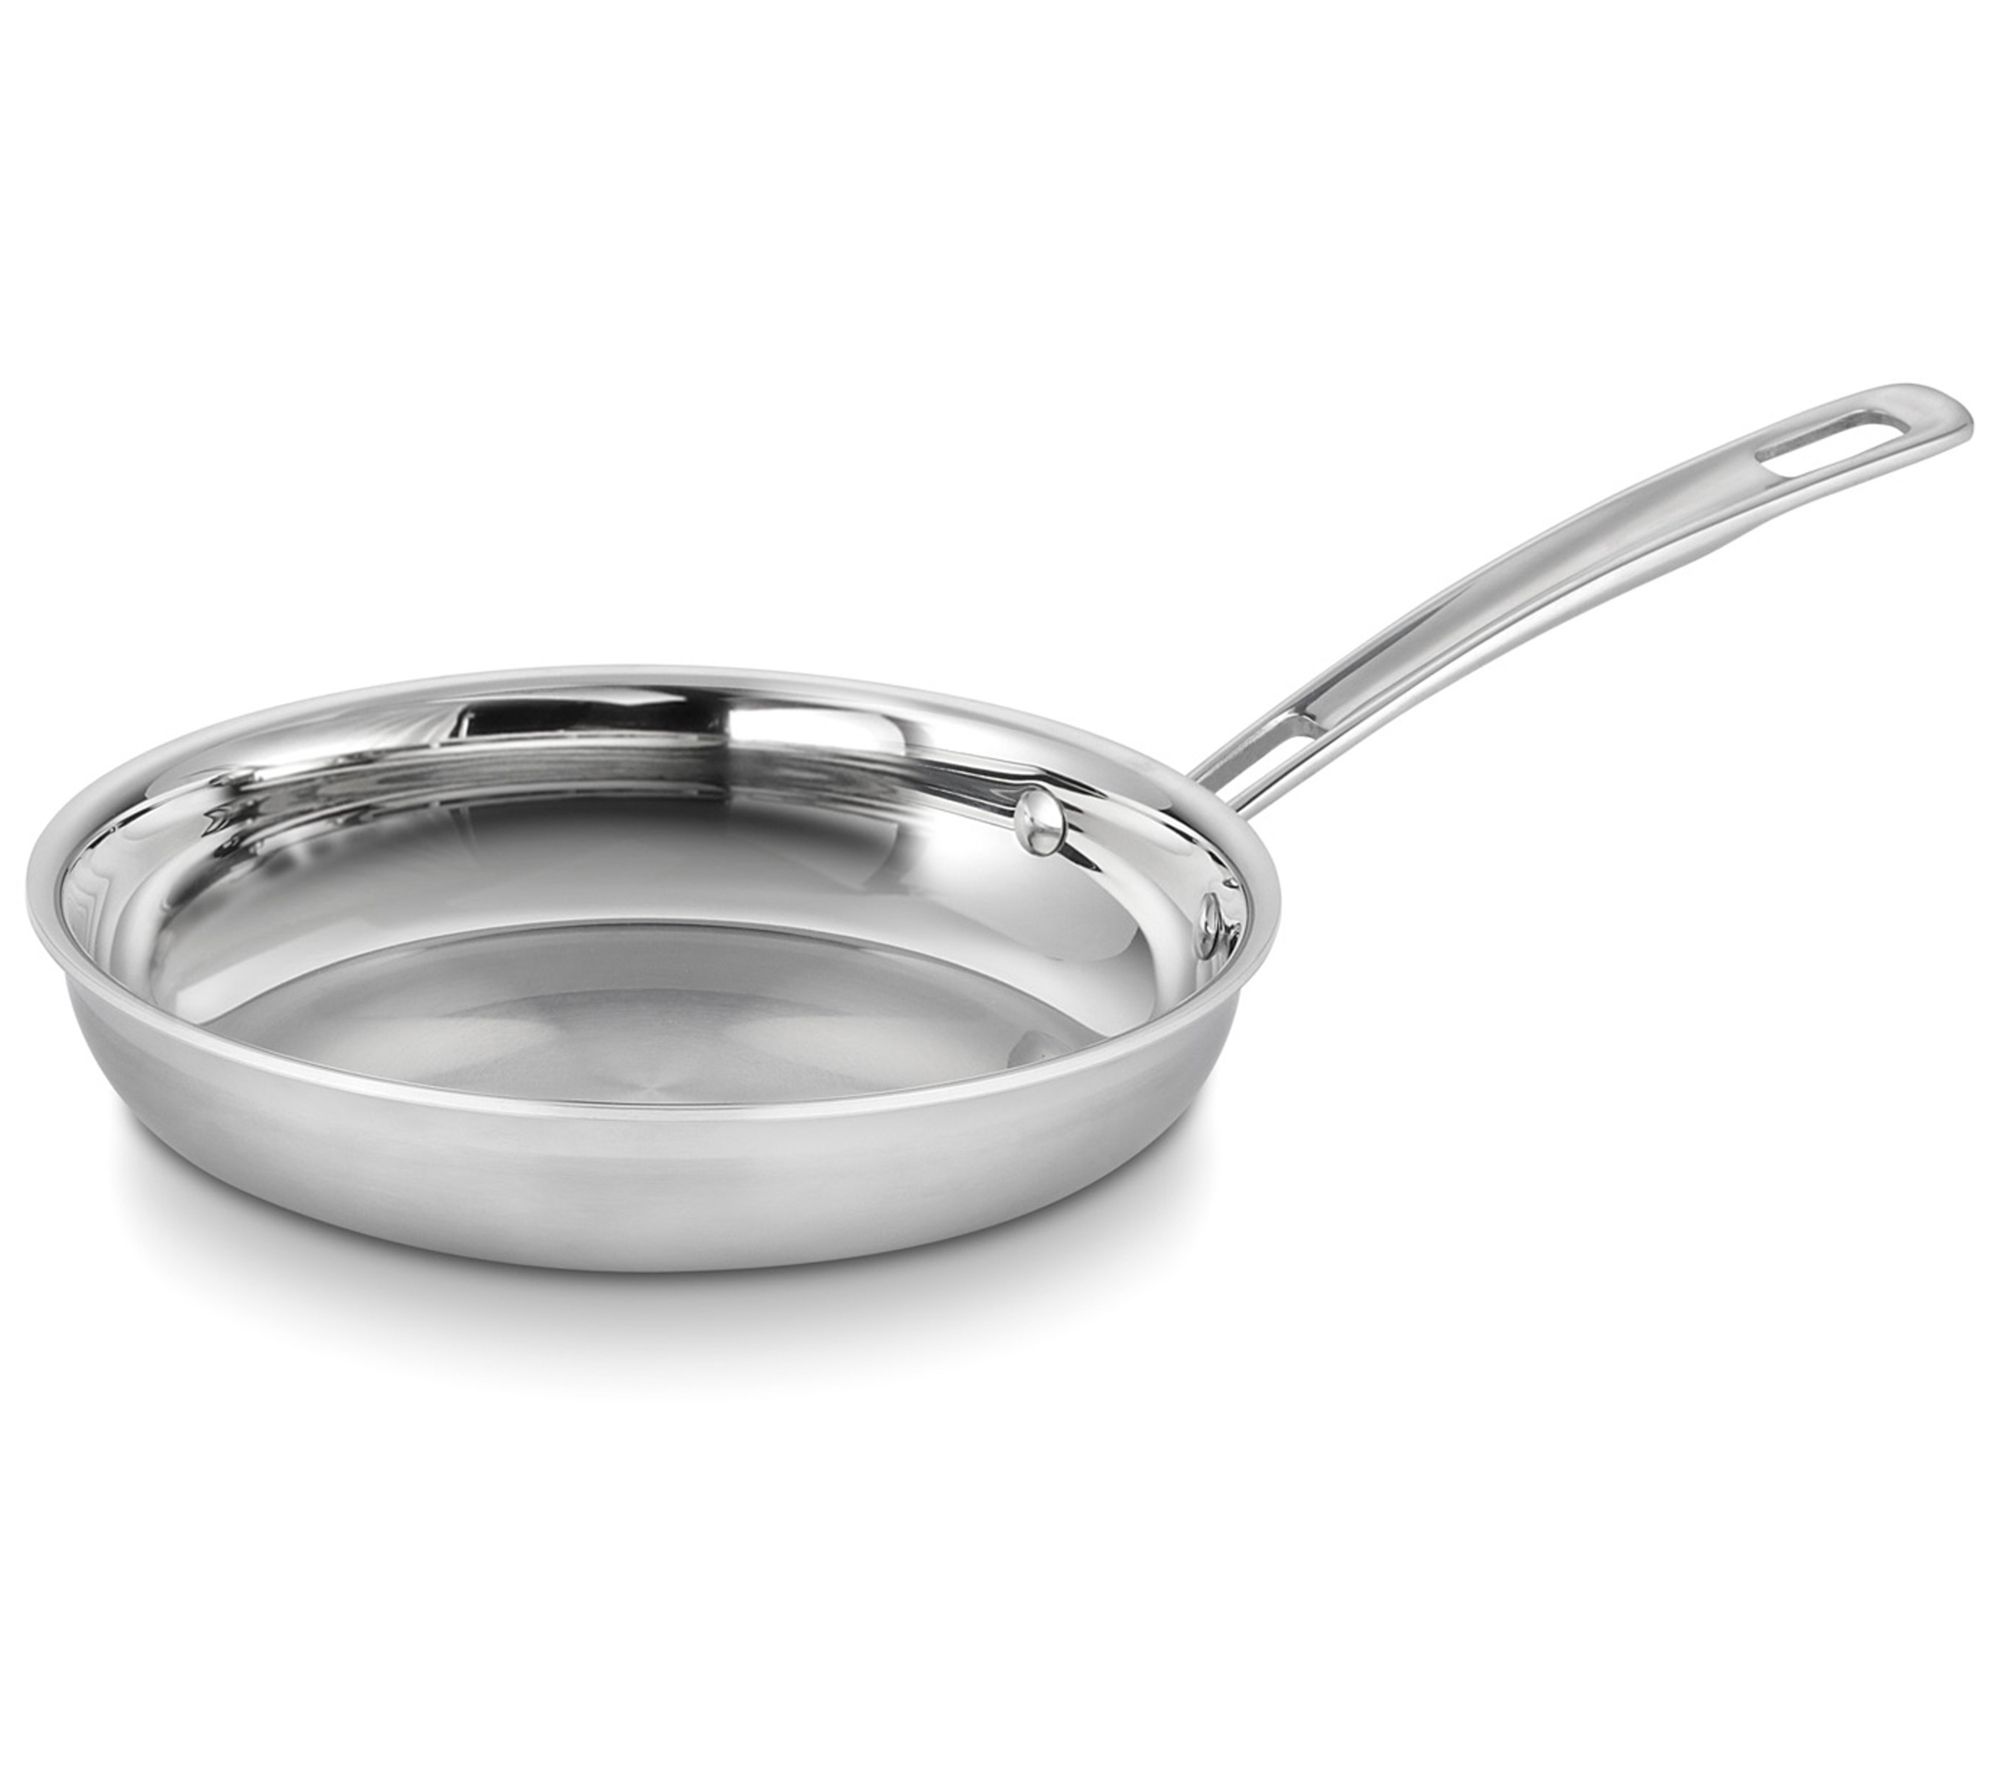 MultiClad Pro Triple Ply Stainless Cookware 8 Nonstick Skillet